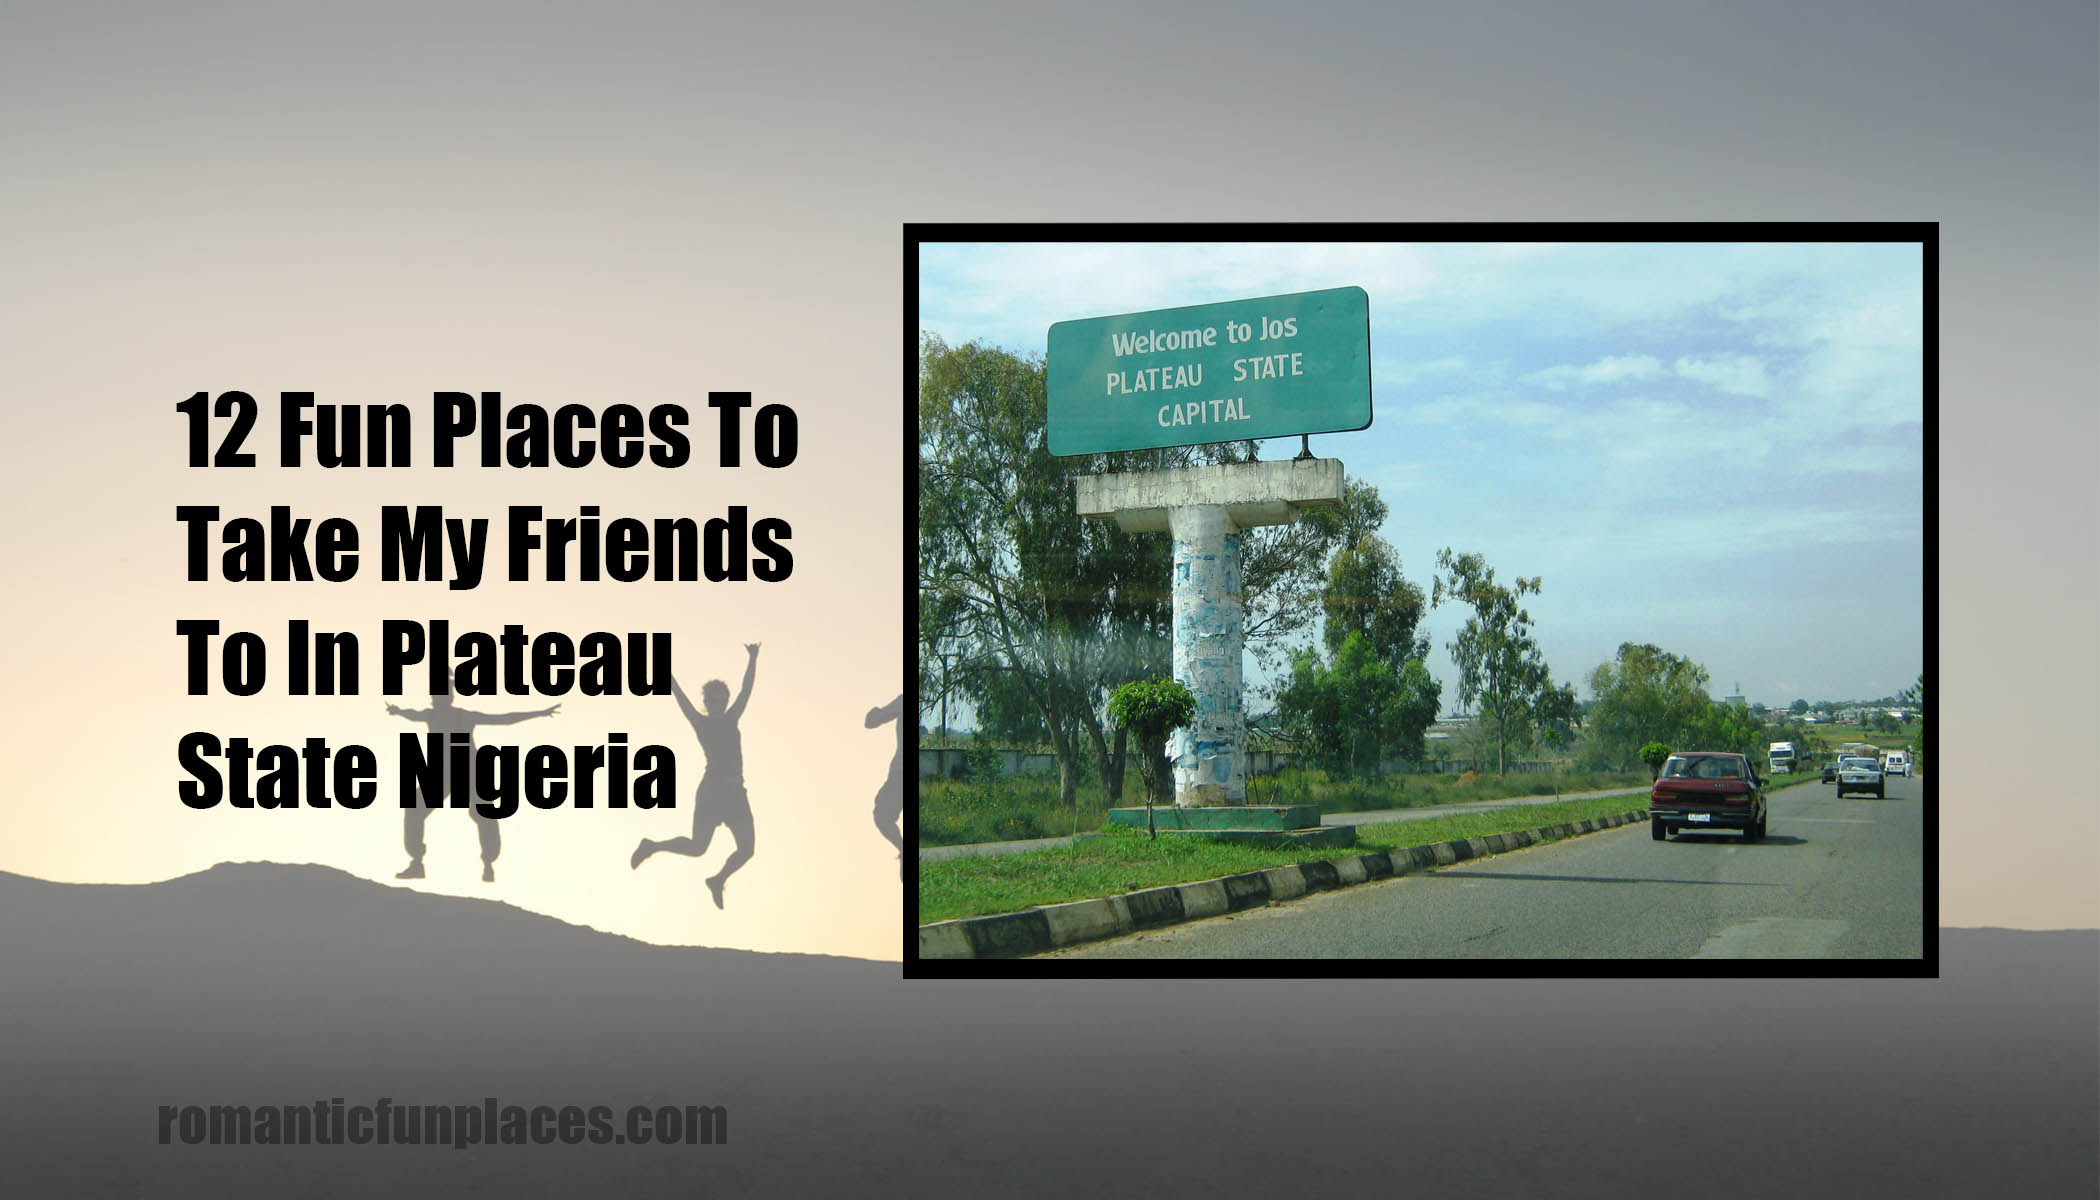 12 Fun Places To Take My Friends To In Plateau State Nigeria